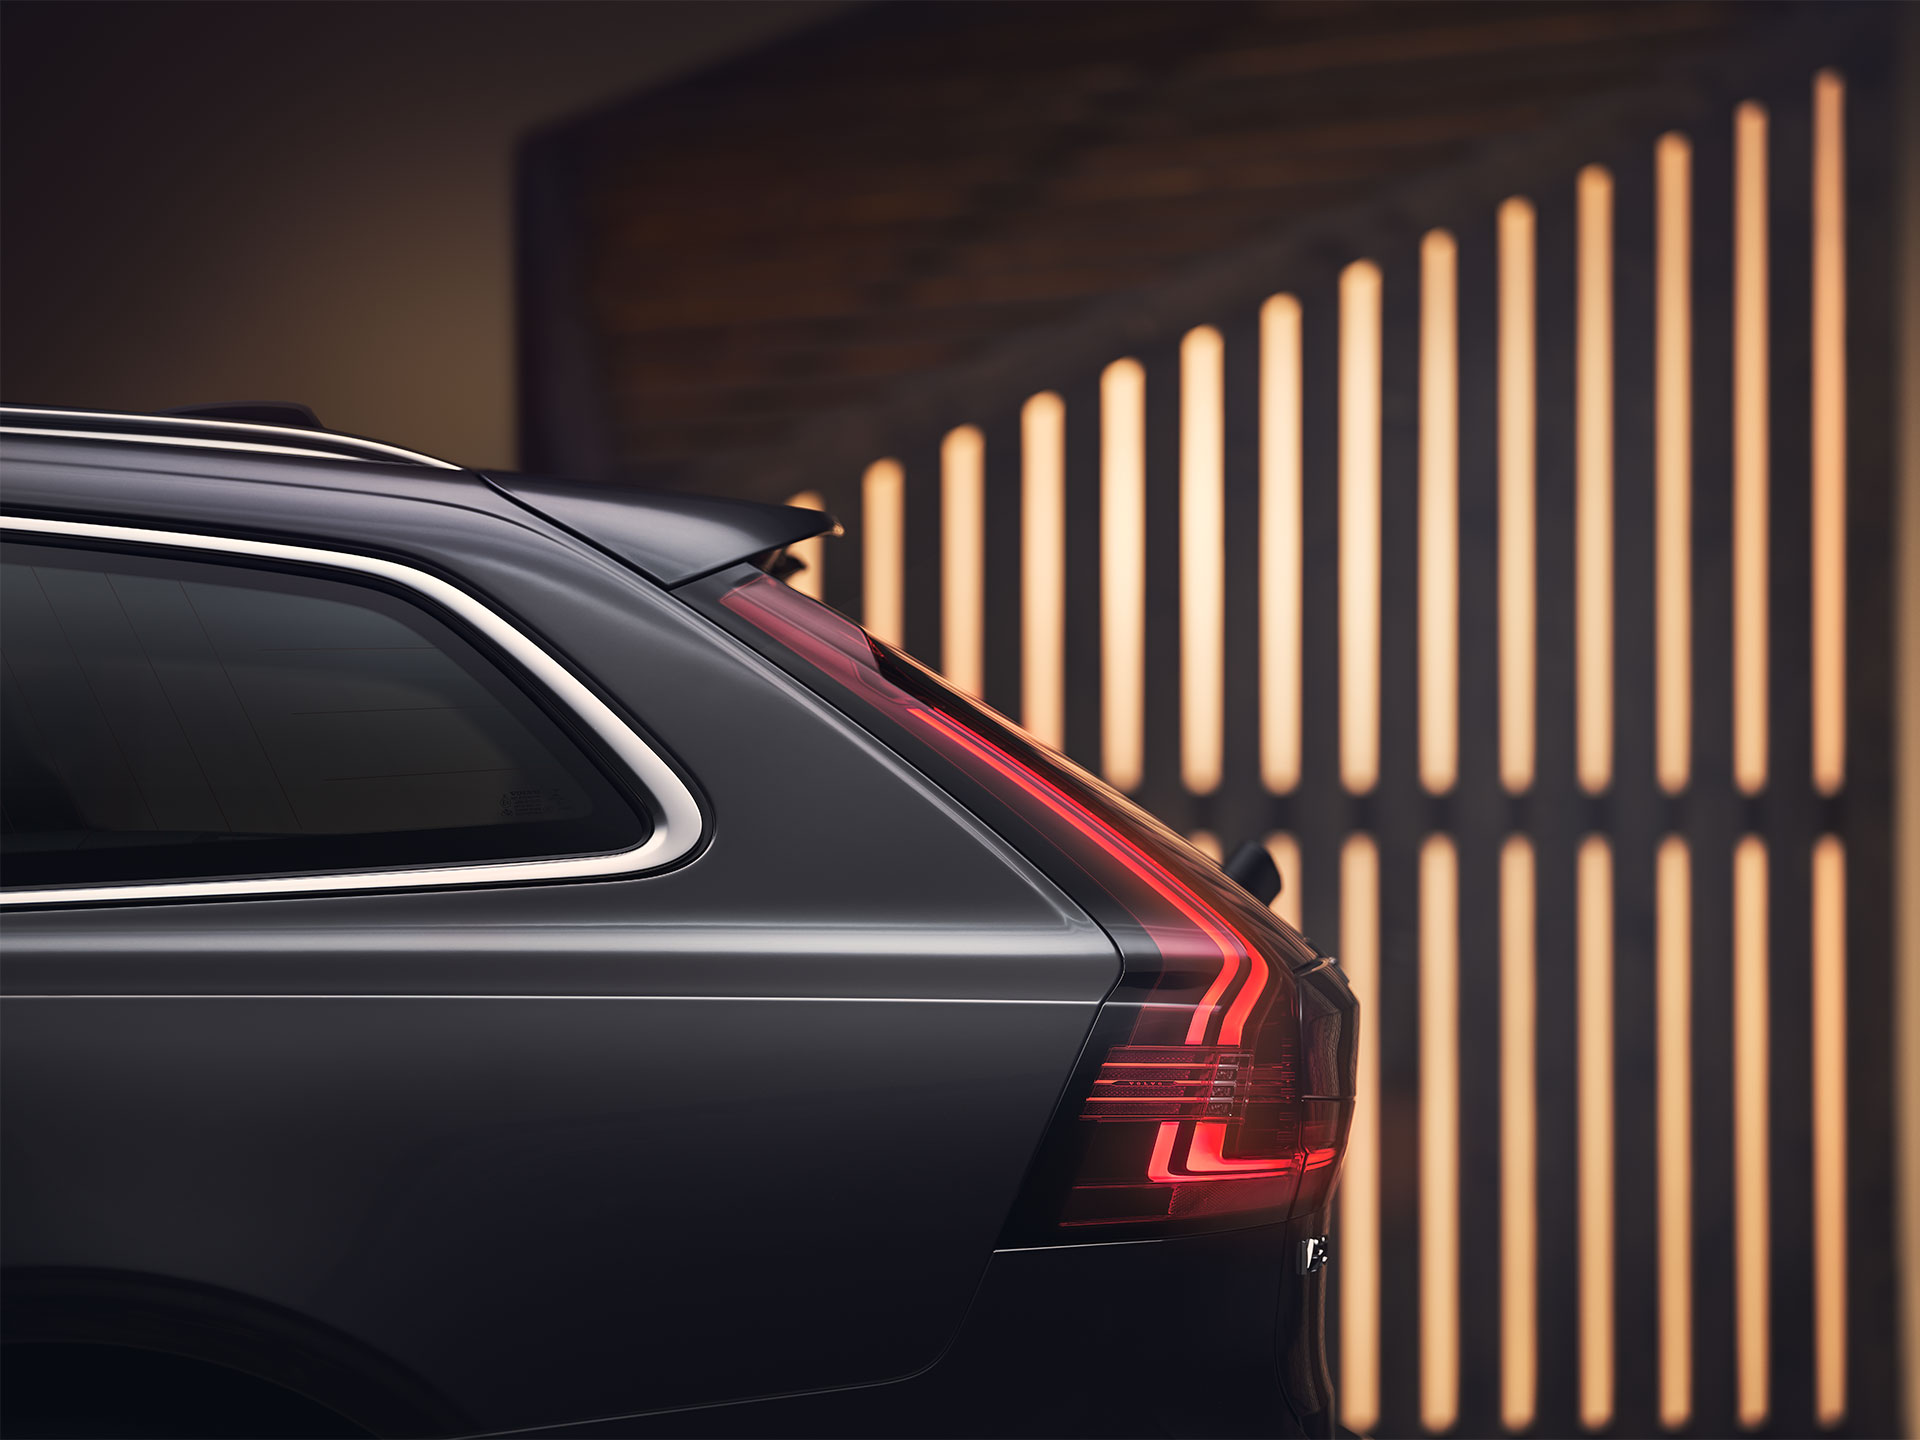 Rear view of Volvo V90 with full LED rear lamps.